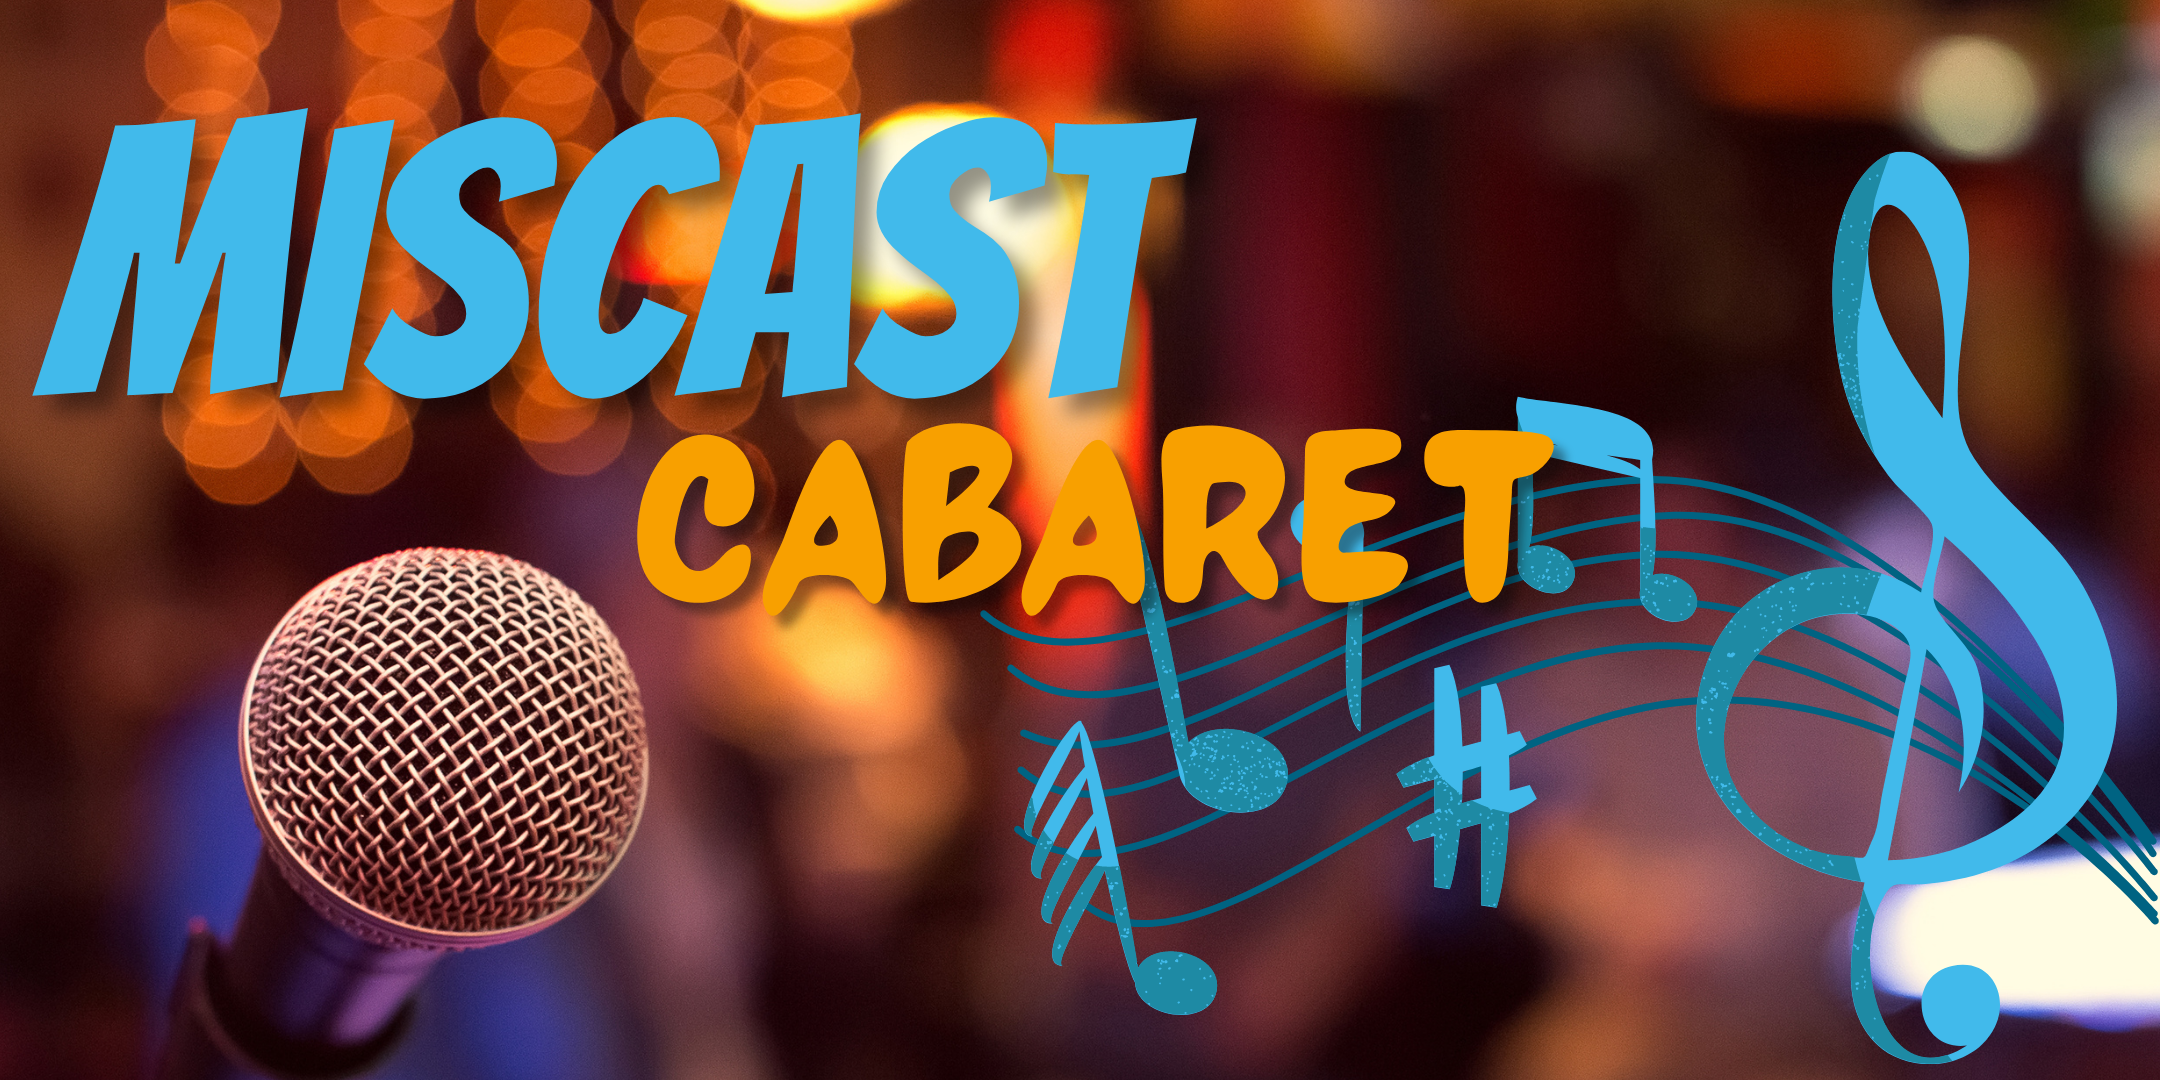 TEXT: "Miscast Cabaret" with background image of a microphone and a backwards music staff with notes